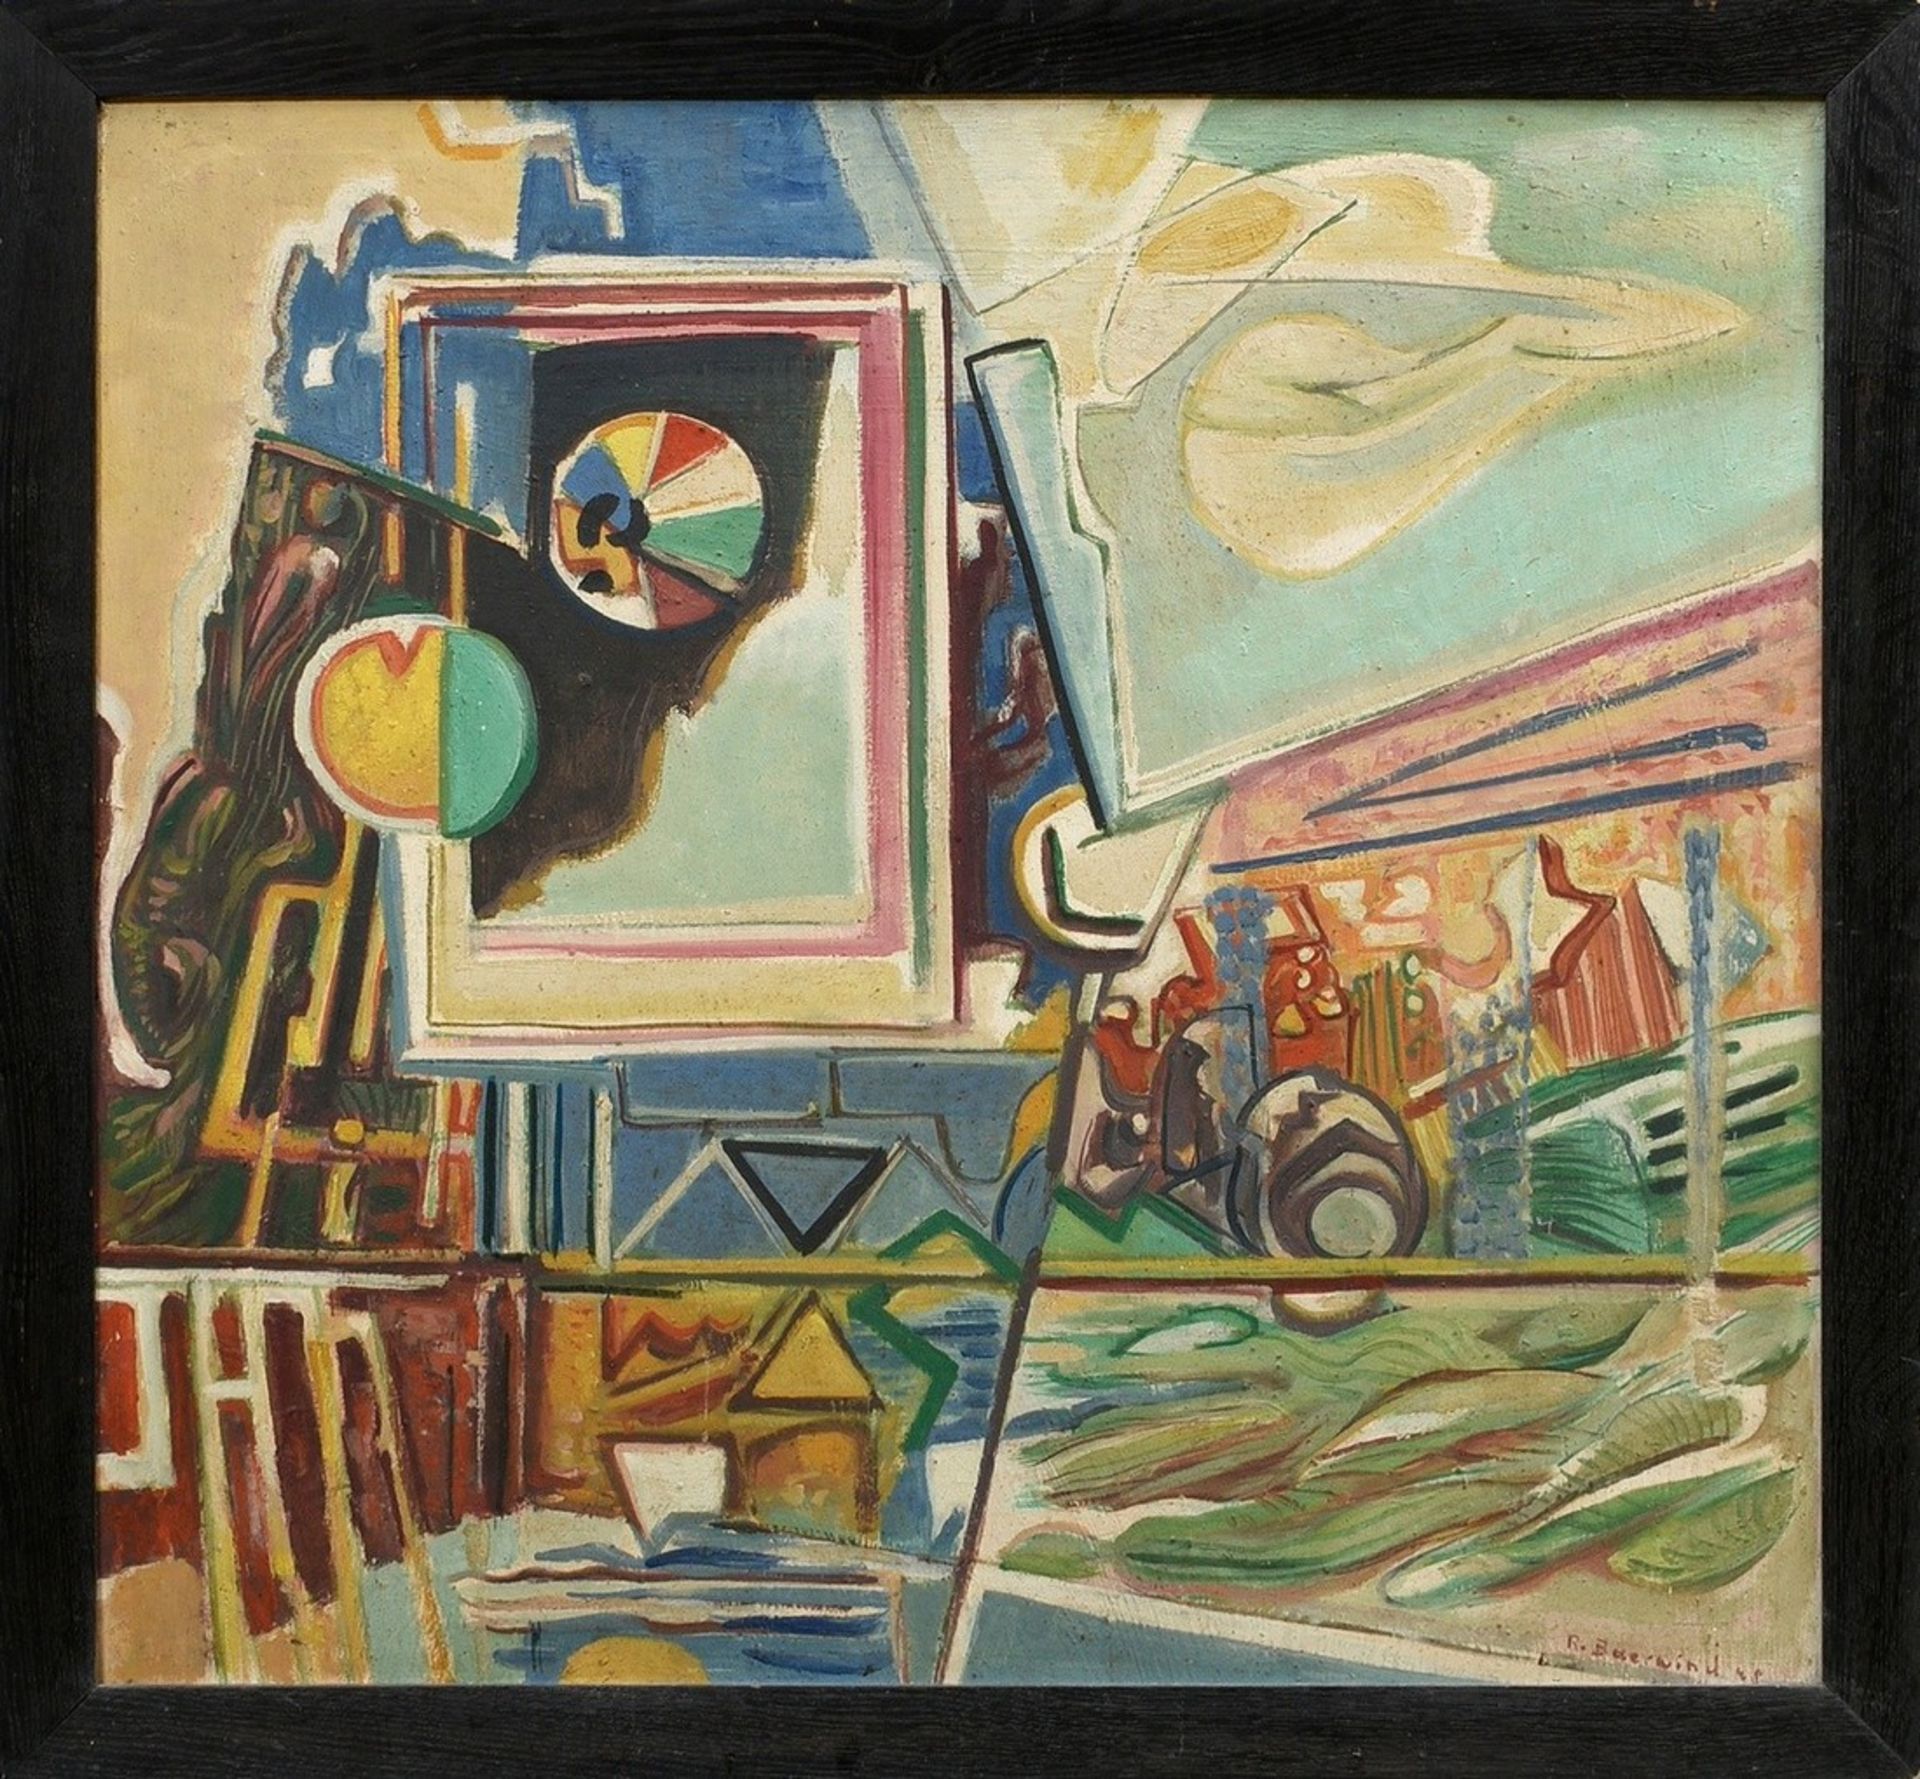 Baerwind, Rudolf (1910-1982) "Abstract Composition" 1948, oil/plate, lower right signed/date - Image 2 of 7